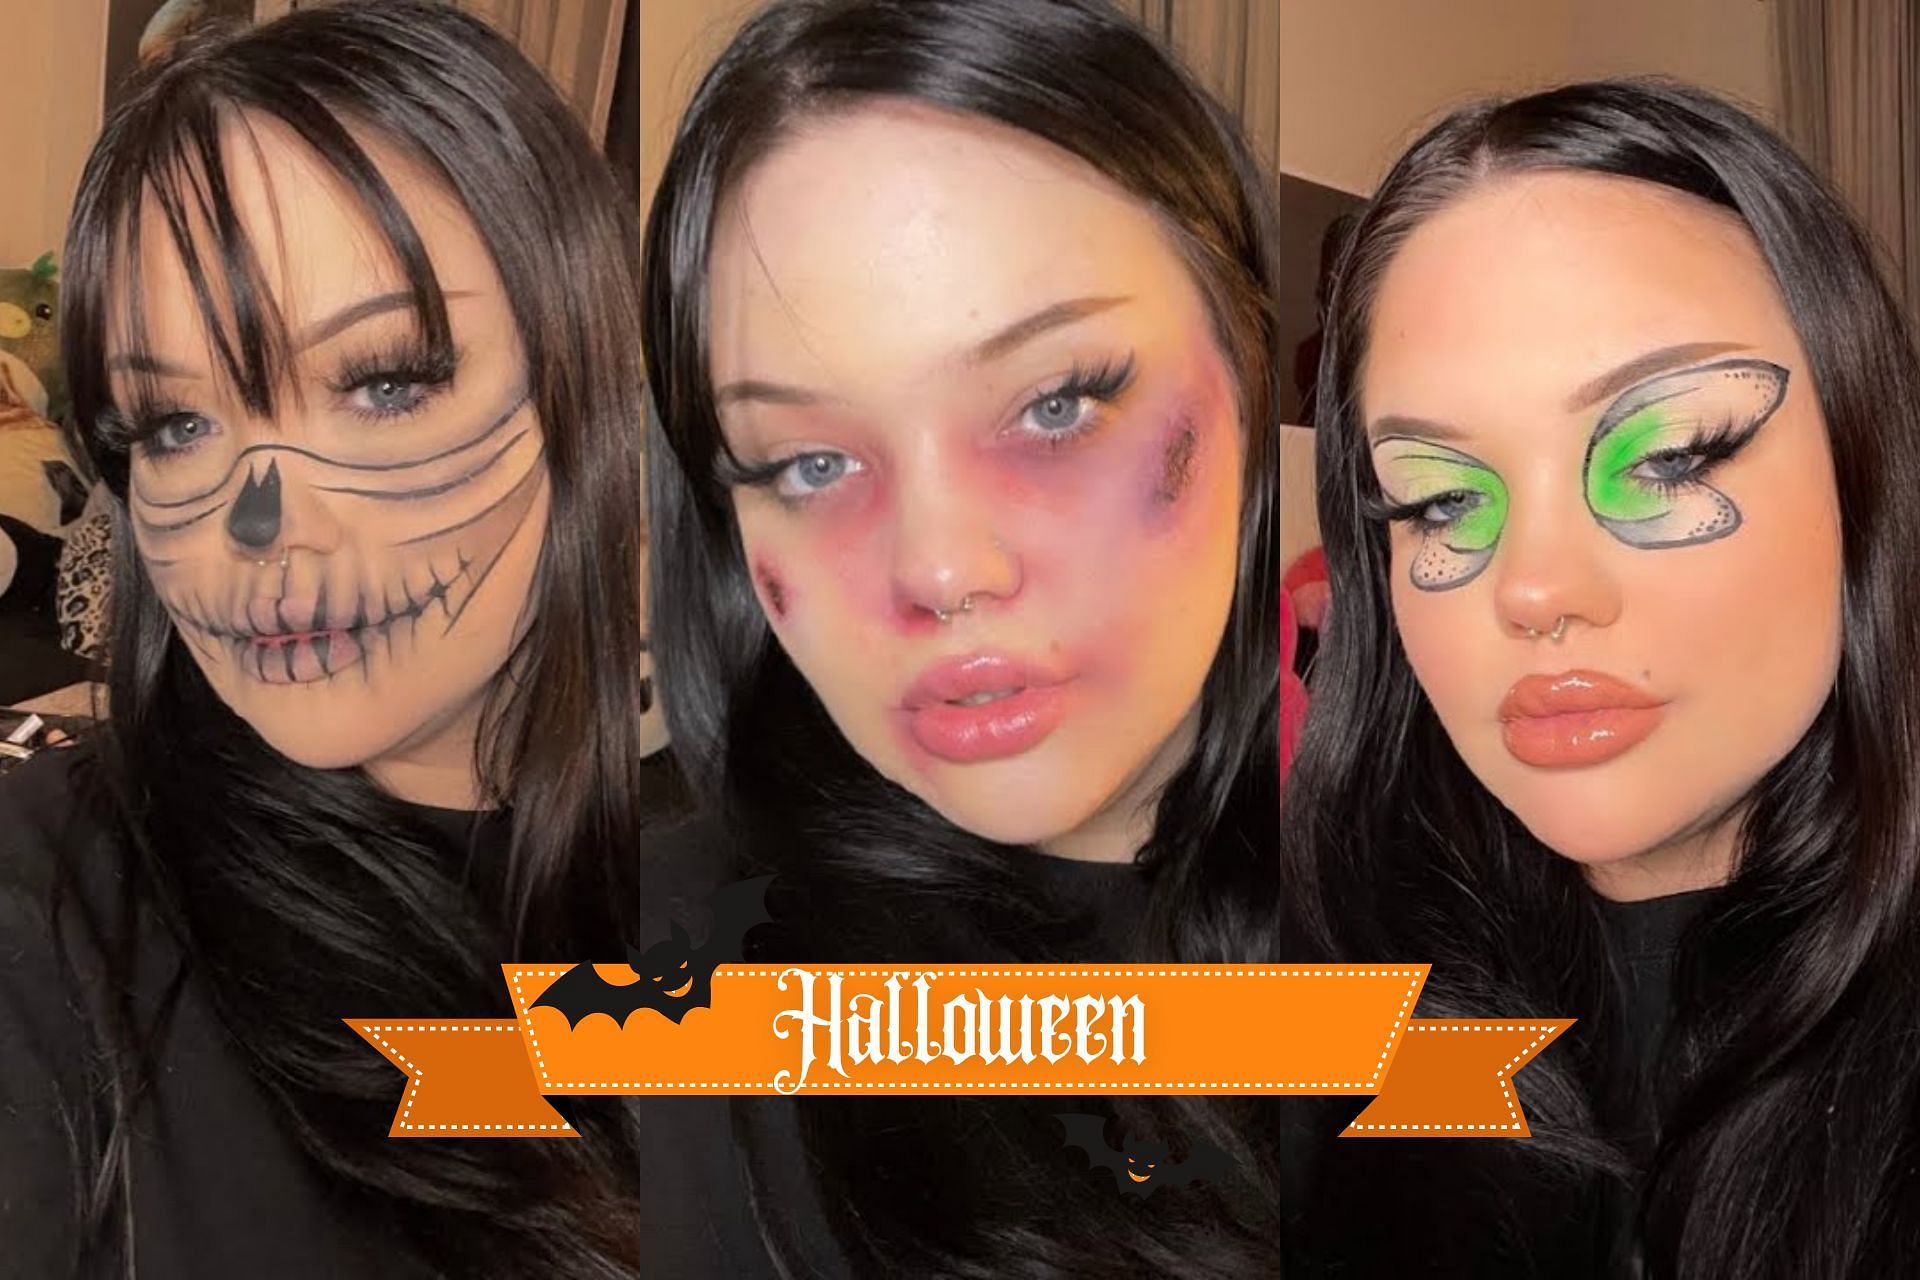 Halloween makeup ideas 2022: 5 clever hacks using items only